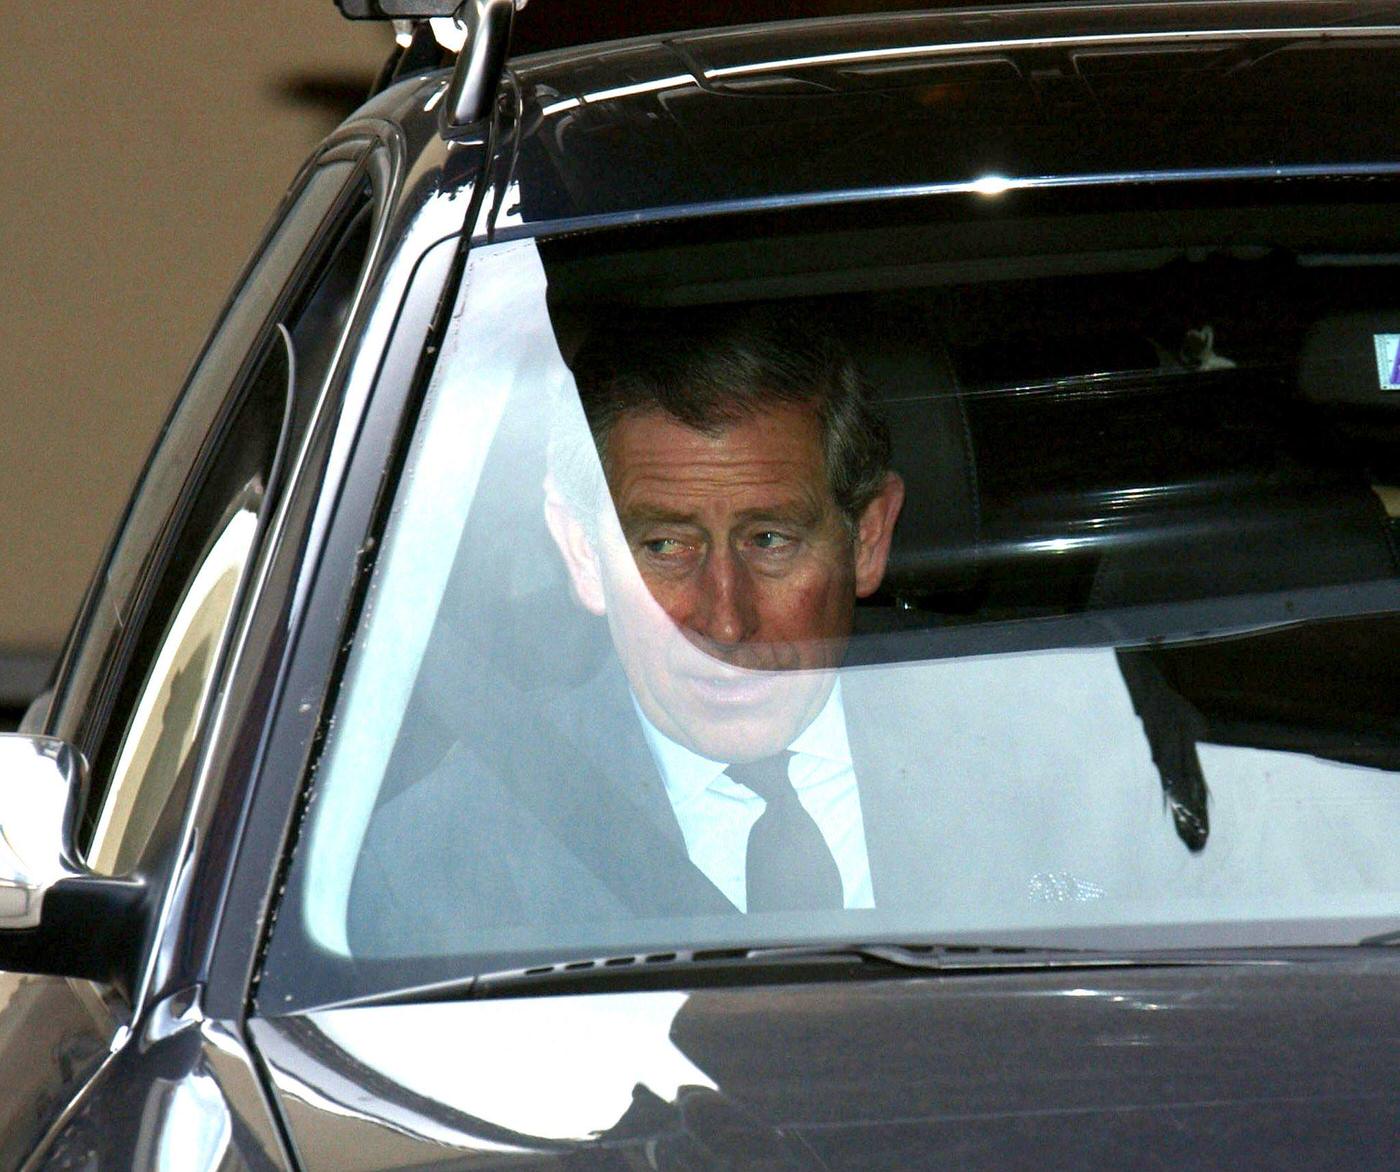 Prince Charles on his way to Windsor following the death of the Queen Mother, Klosters, 2002